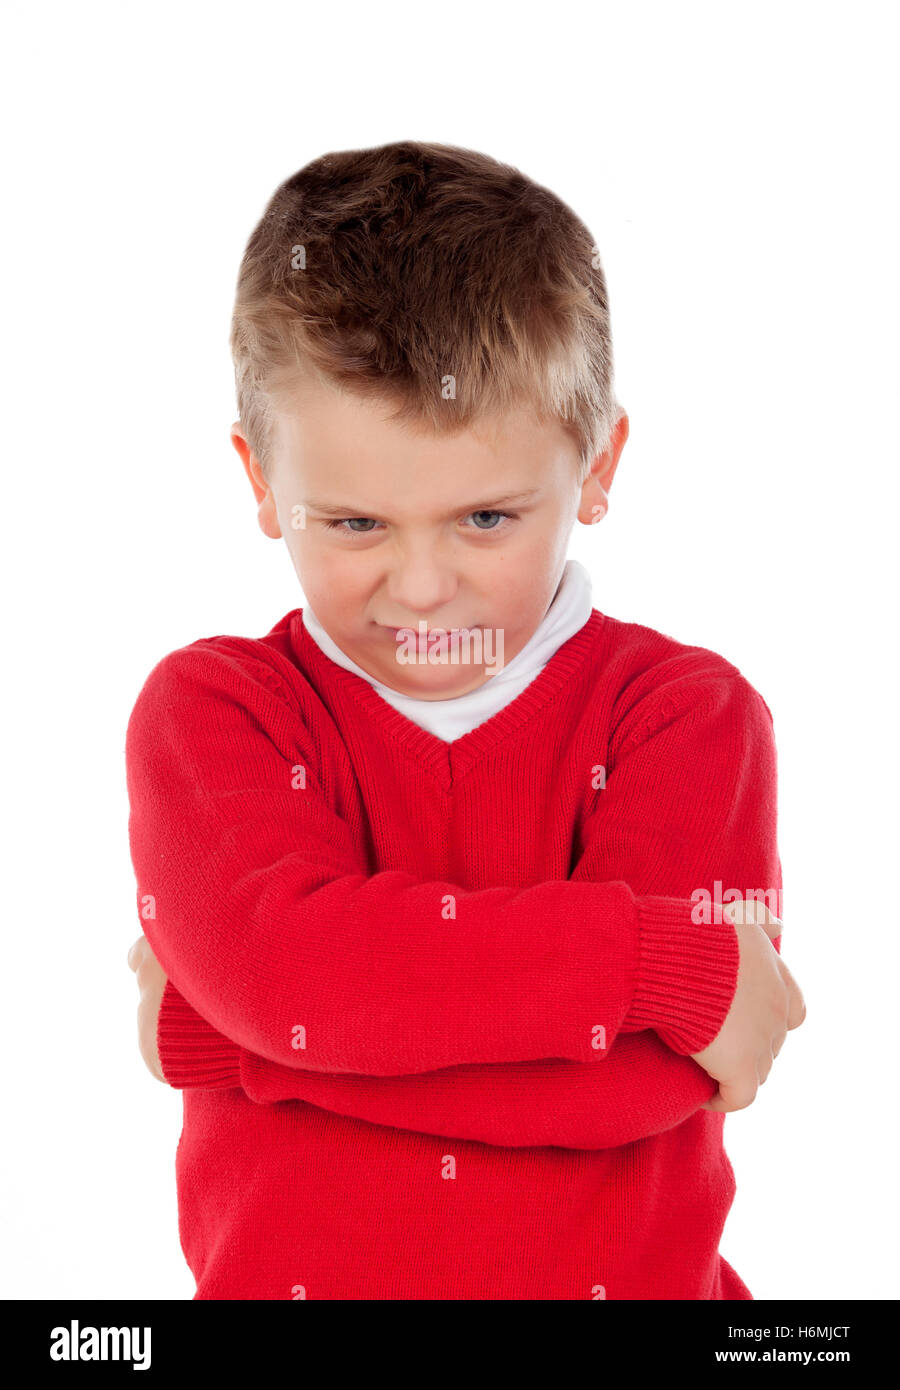 Little angry kid with red jersey isolated on a white background Stock Photo